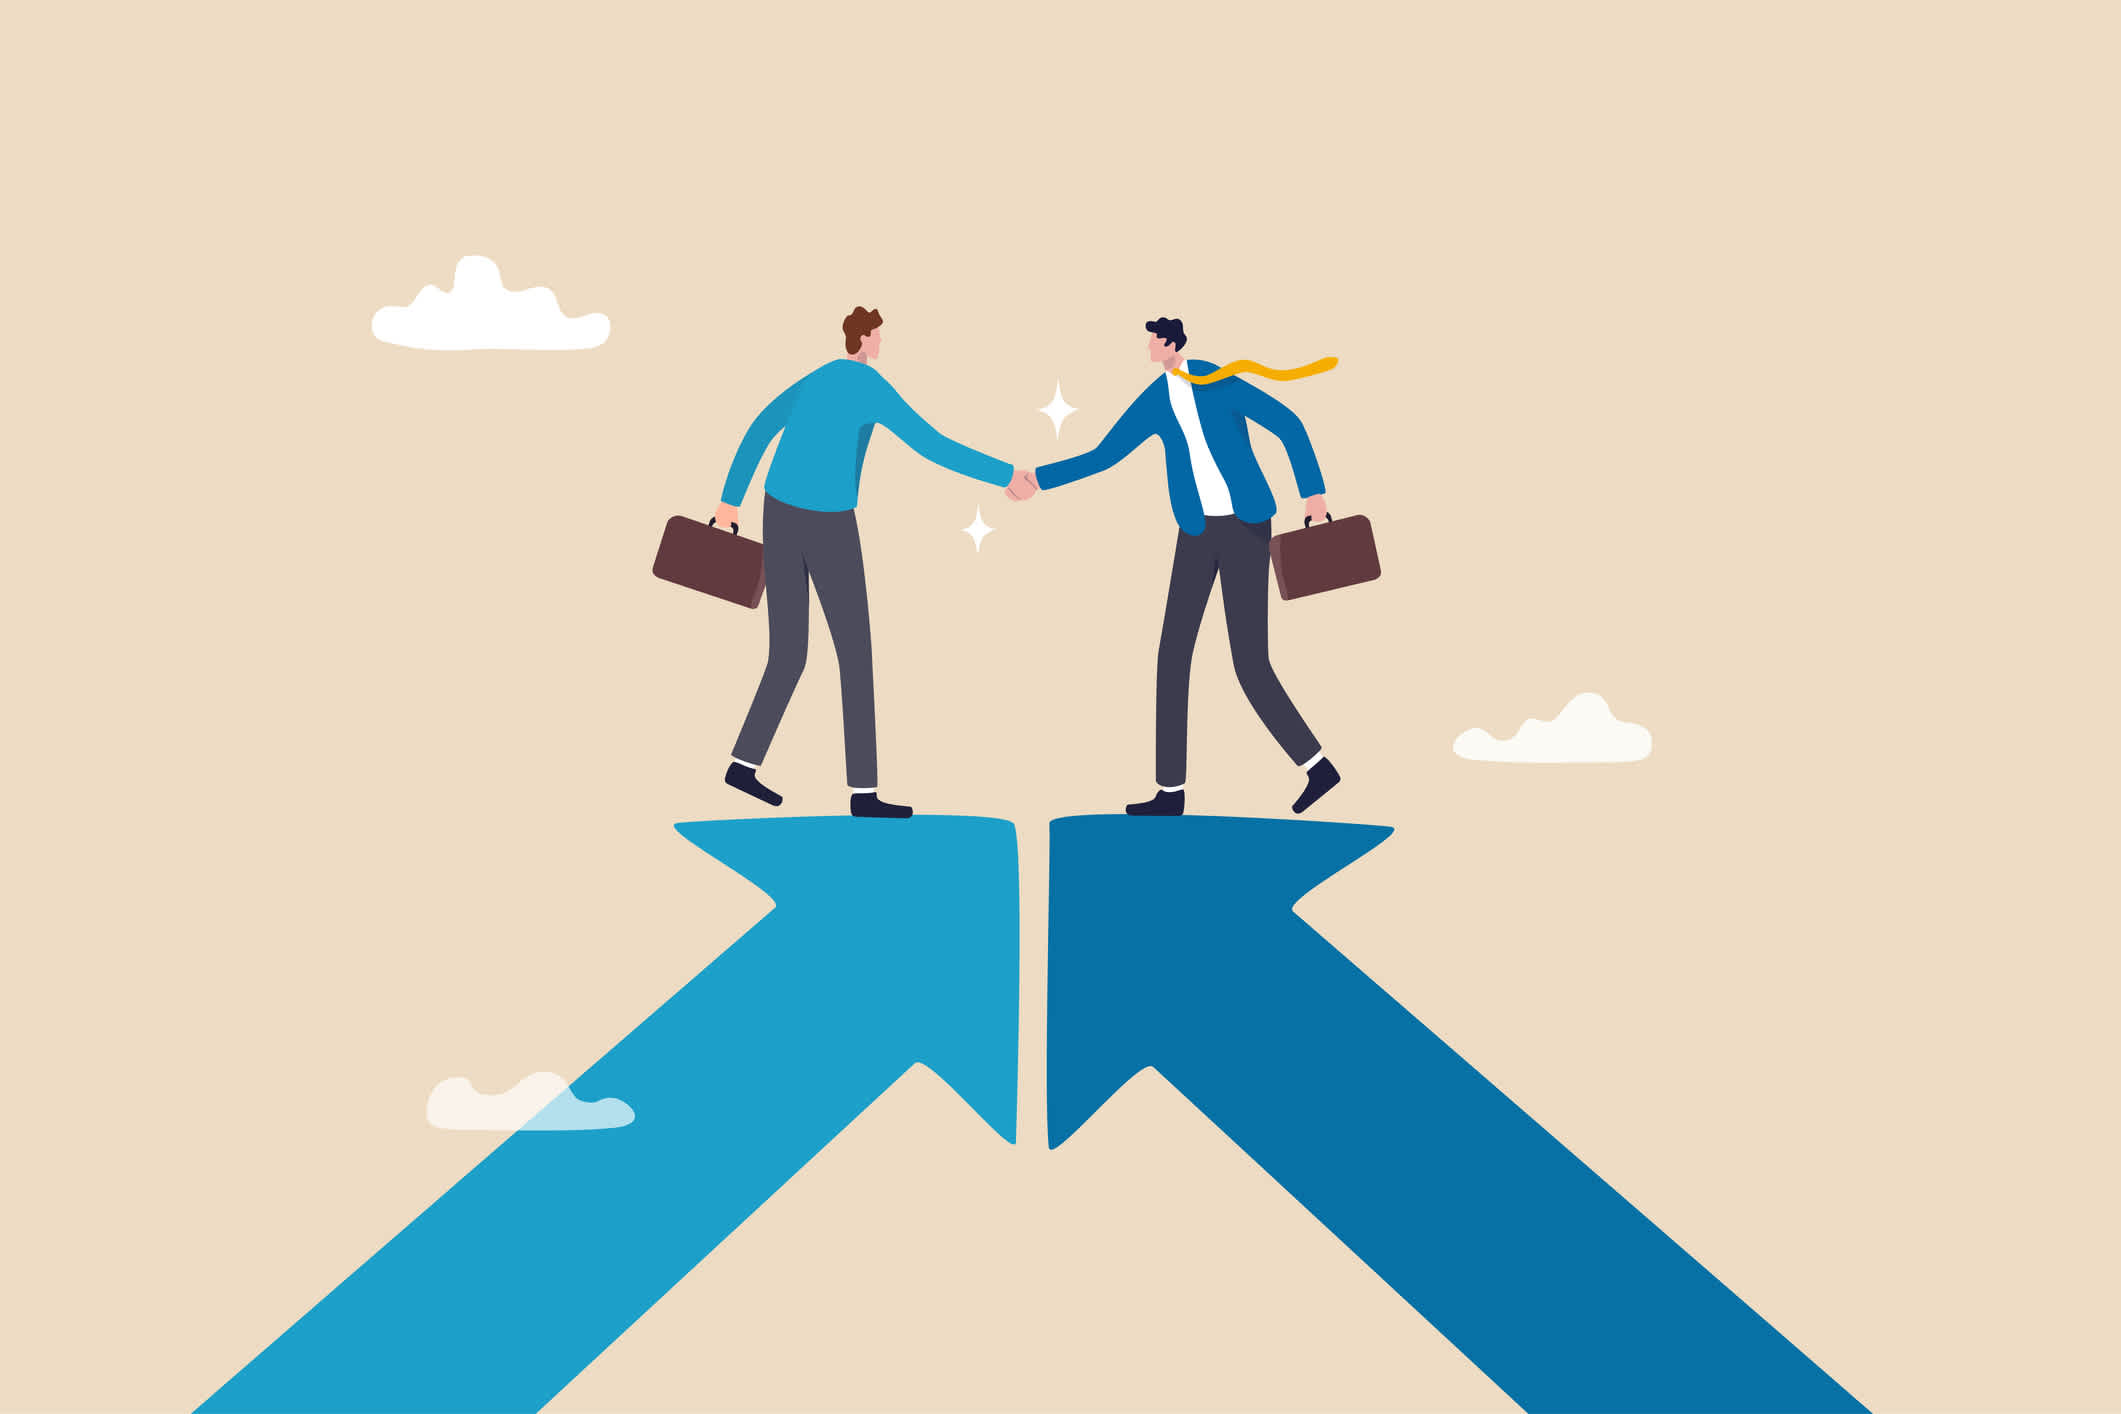 An illustration of two businessmen, each standing on an arrow, shaking hands